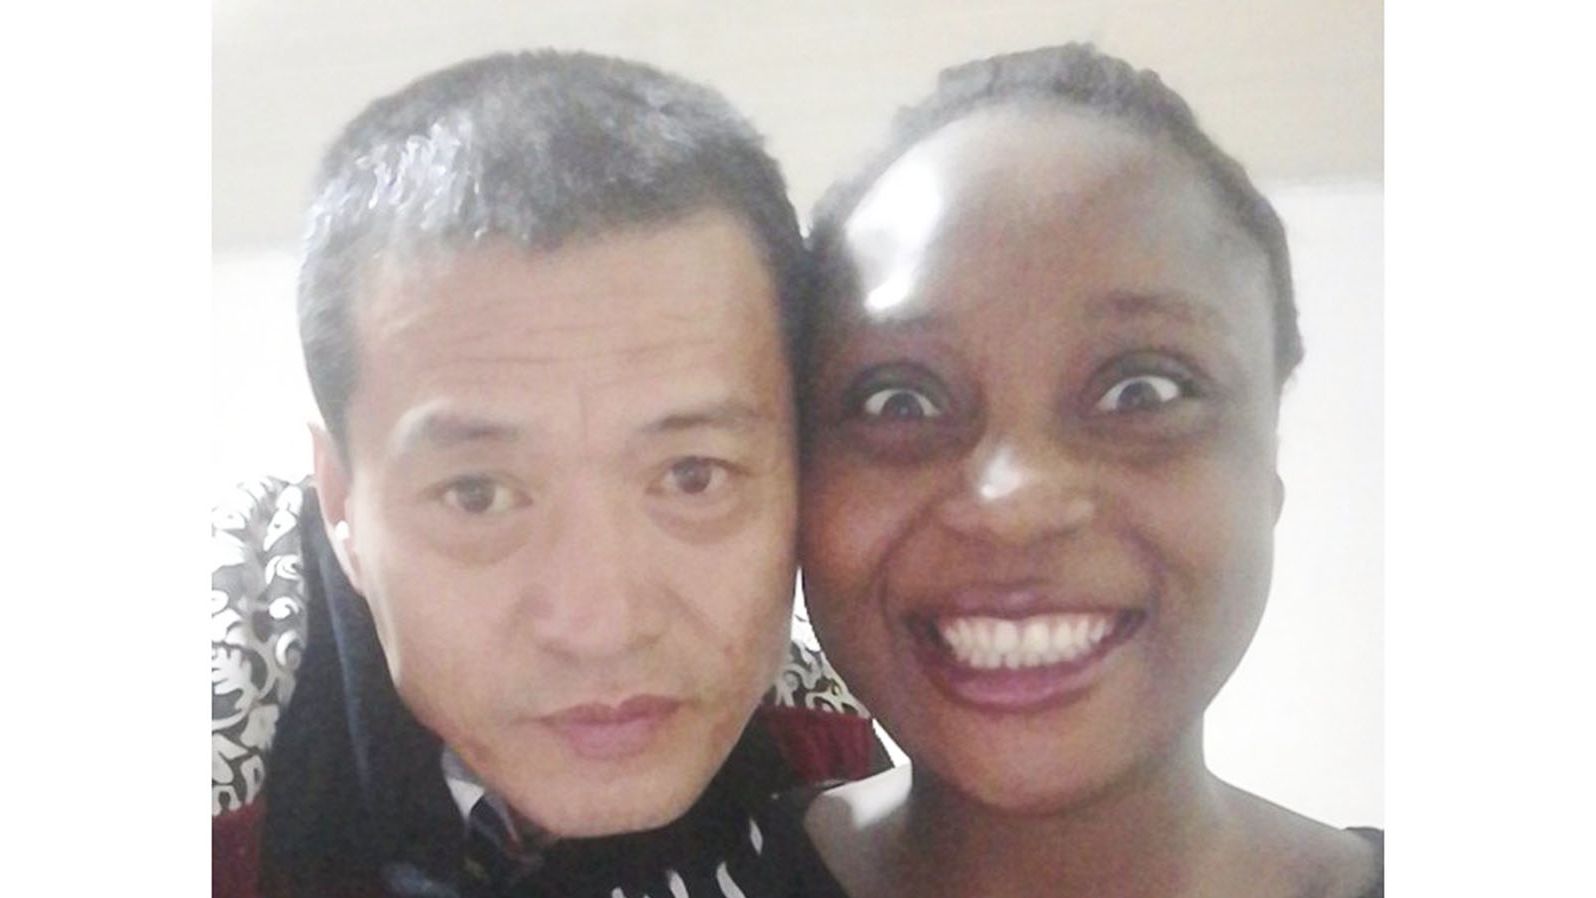 Sandra Made and Zou Qianshun met in Cameroon and married in 2017.